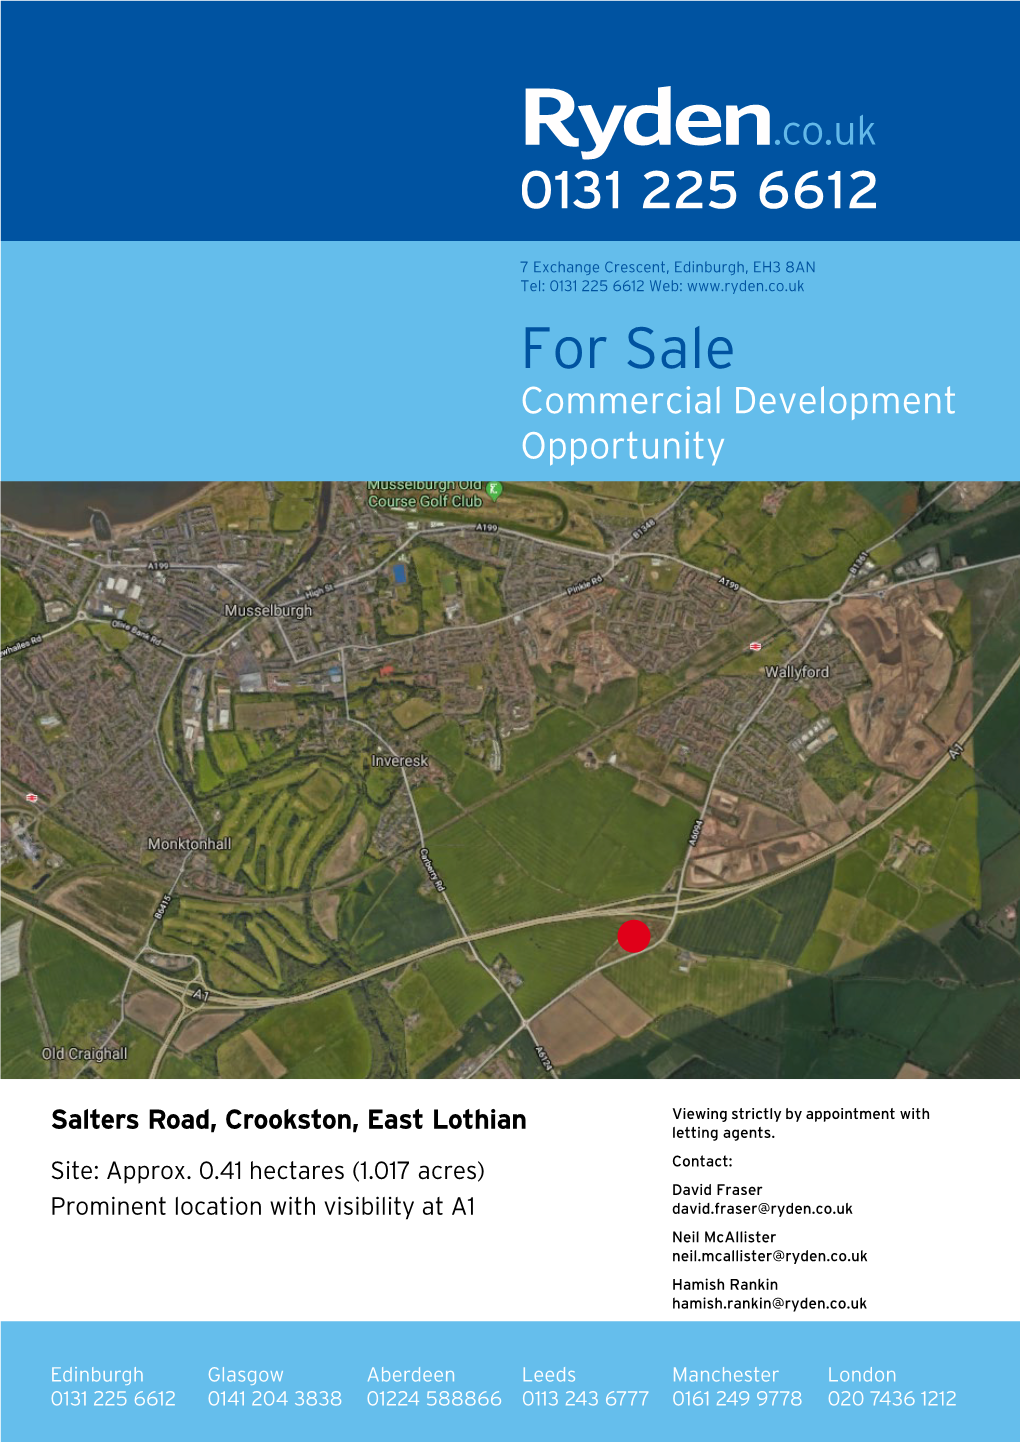 For Sale Commercial Development Opportunity